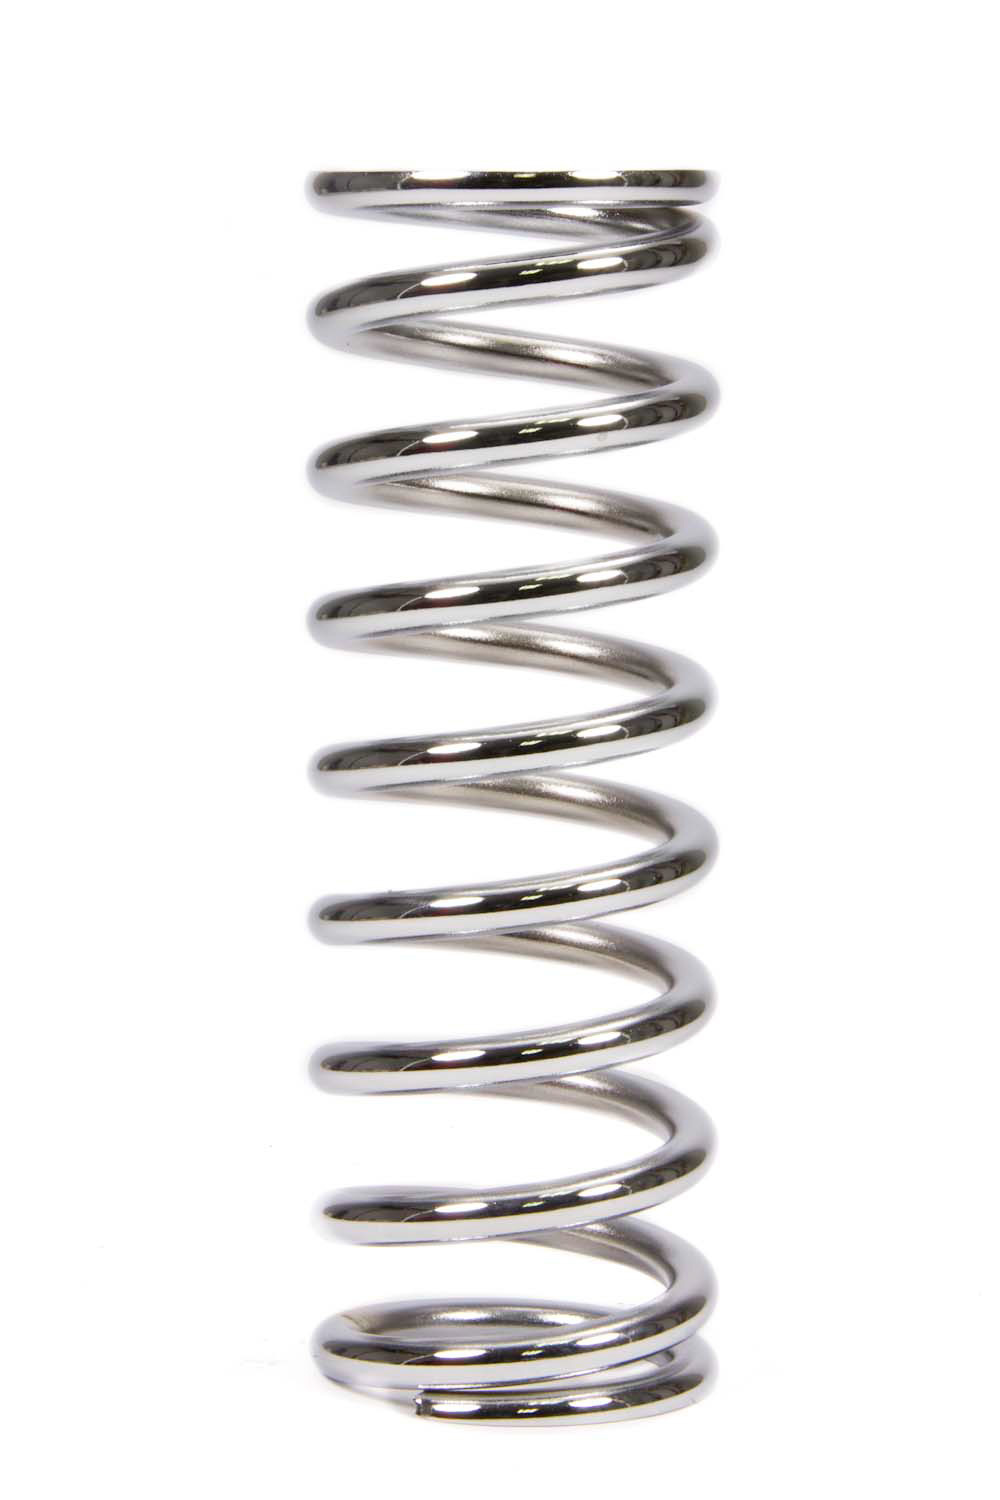 QA1 10CS150 Coil Spring, Coil-Over, 2.500 in ID, 10.000 in Length, 150 lb/in Spring Rate, Steel, Chrome, Each